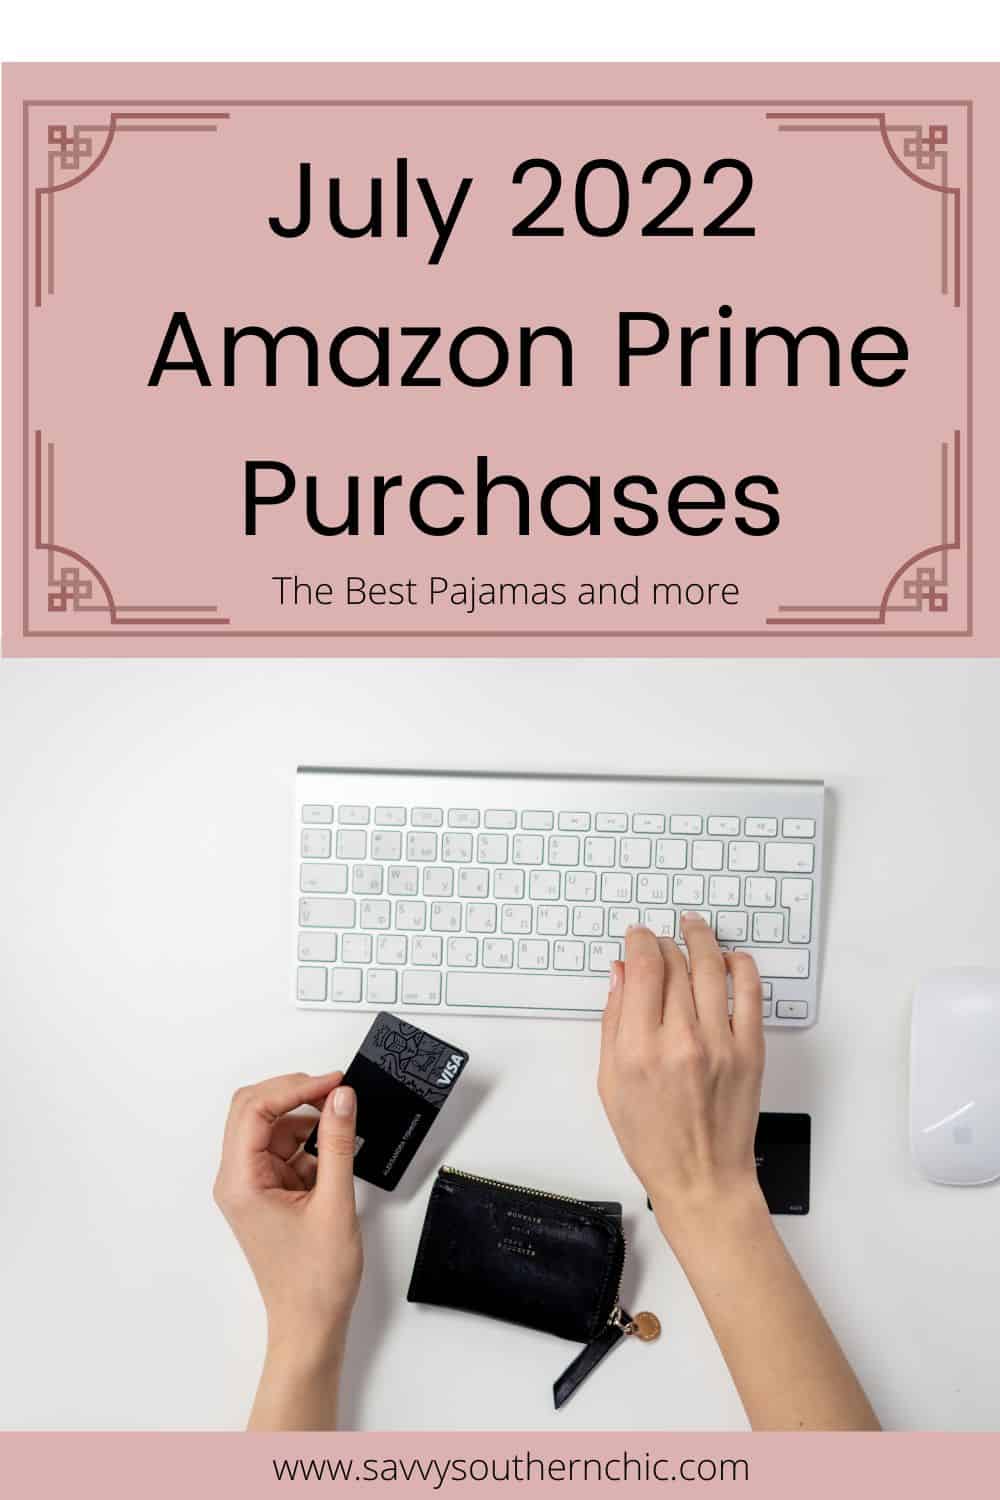 July 2022 Amazon Prime Purchases